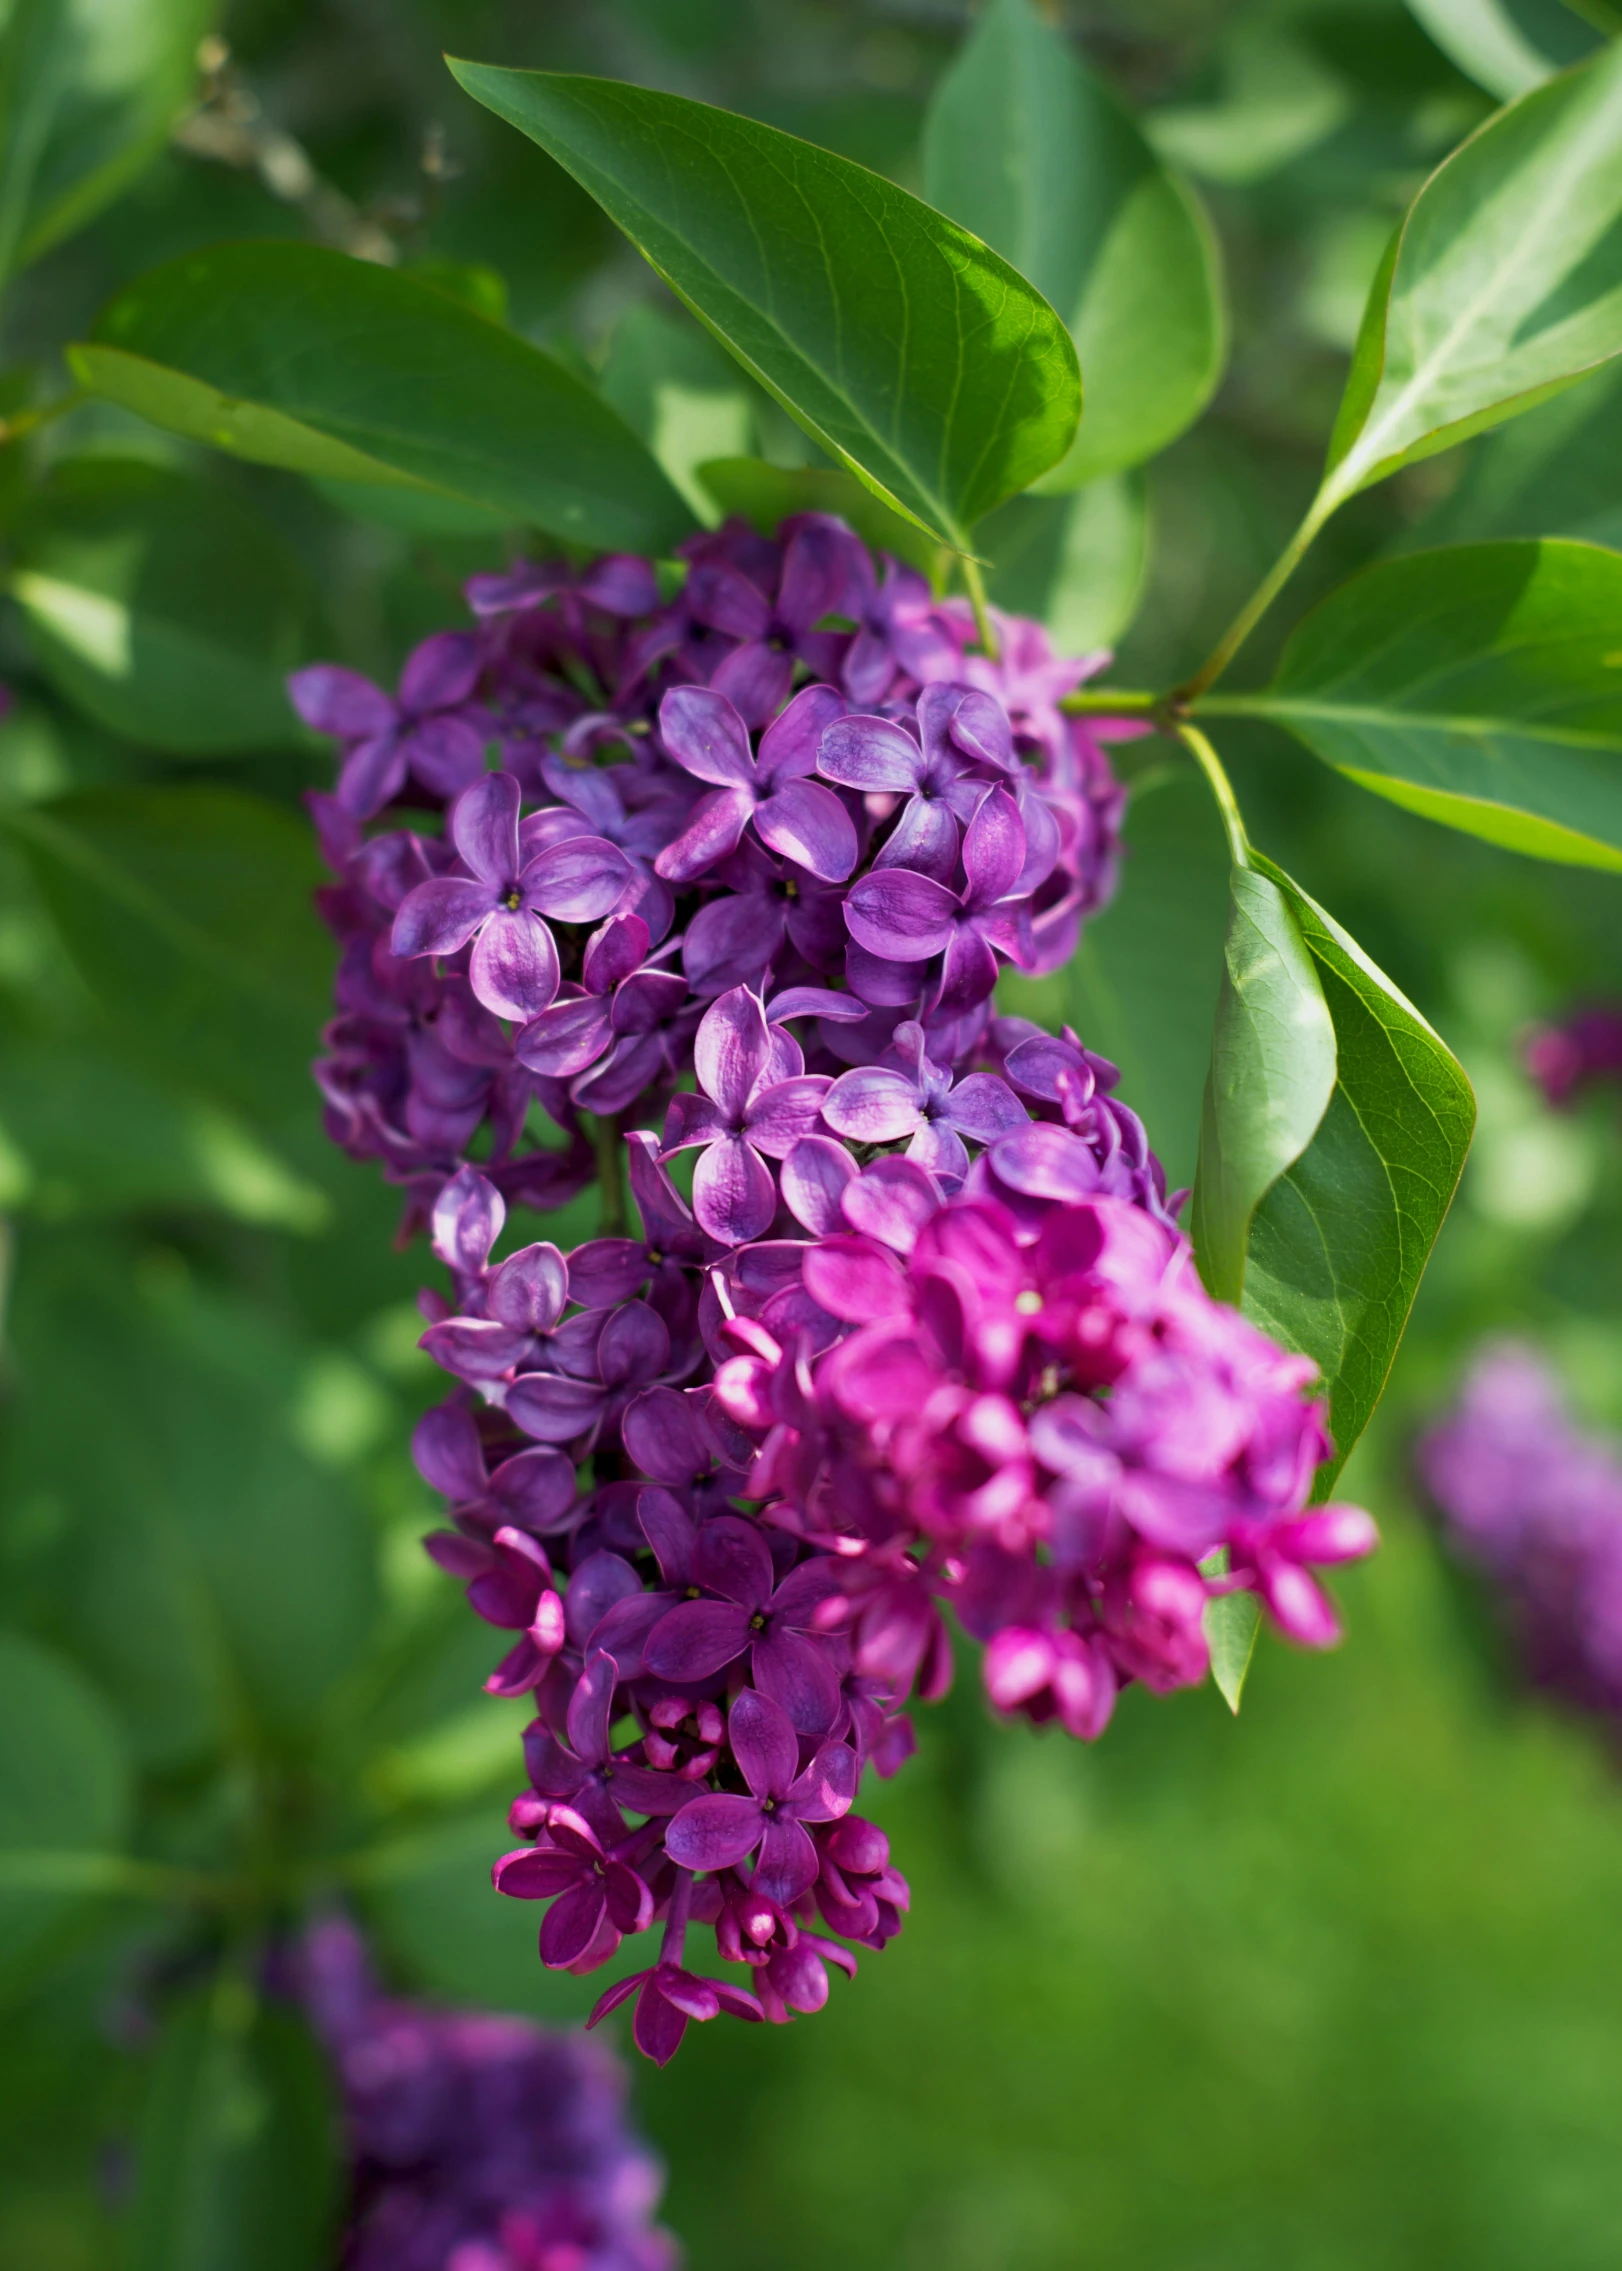 a close up of some purple flowers on a tree